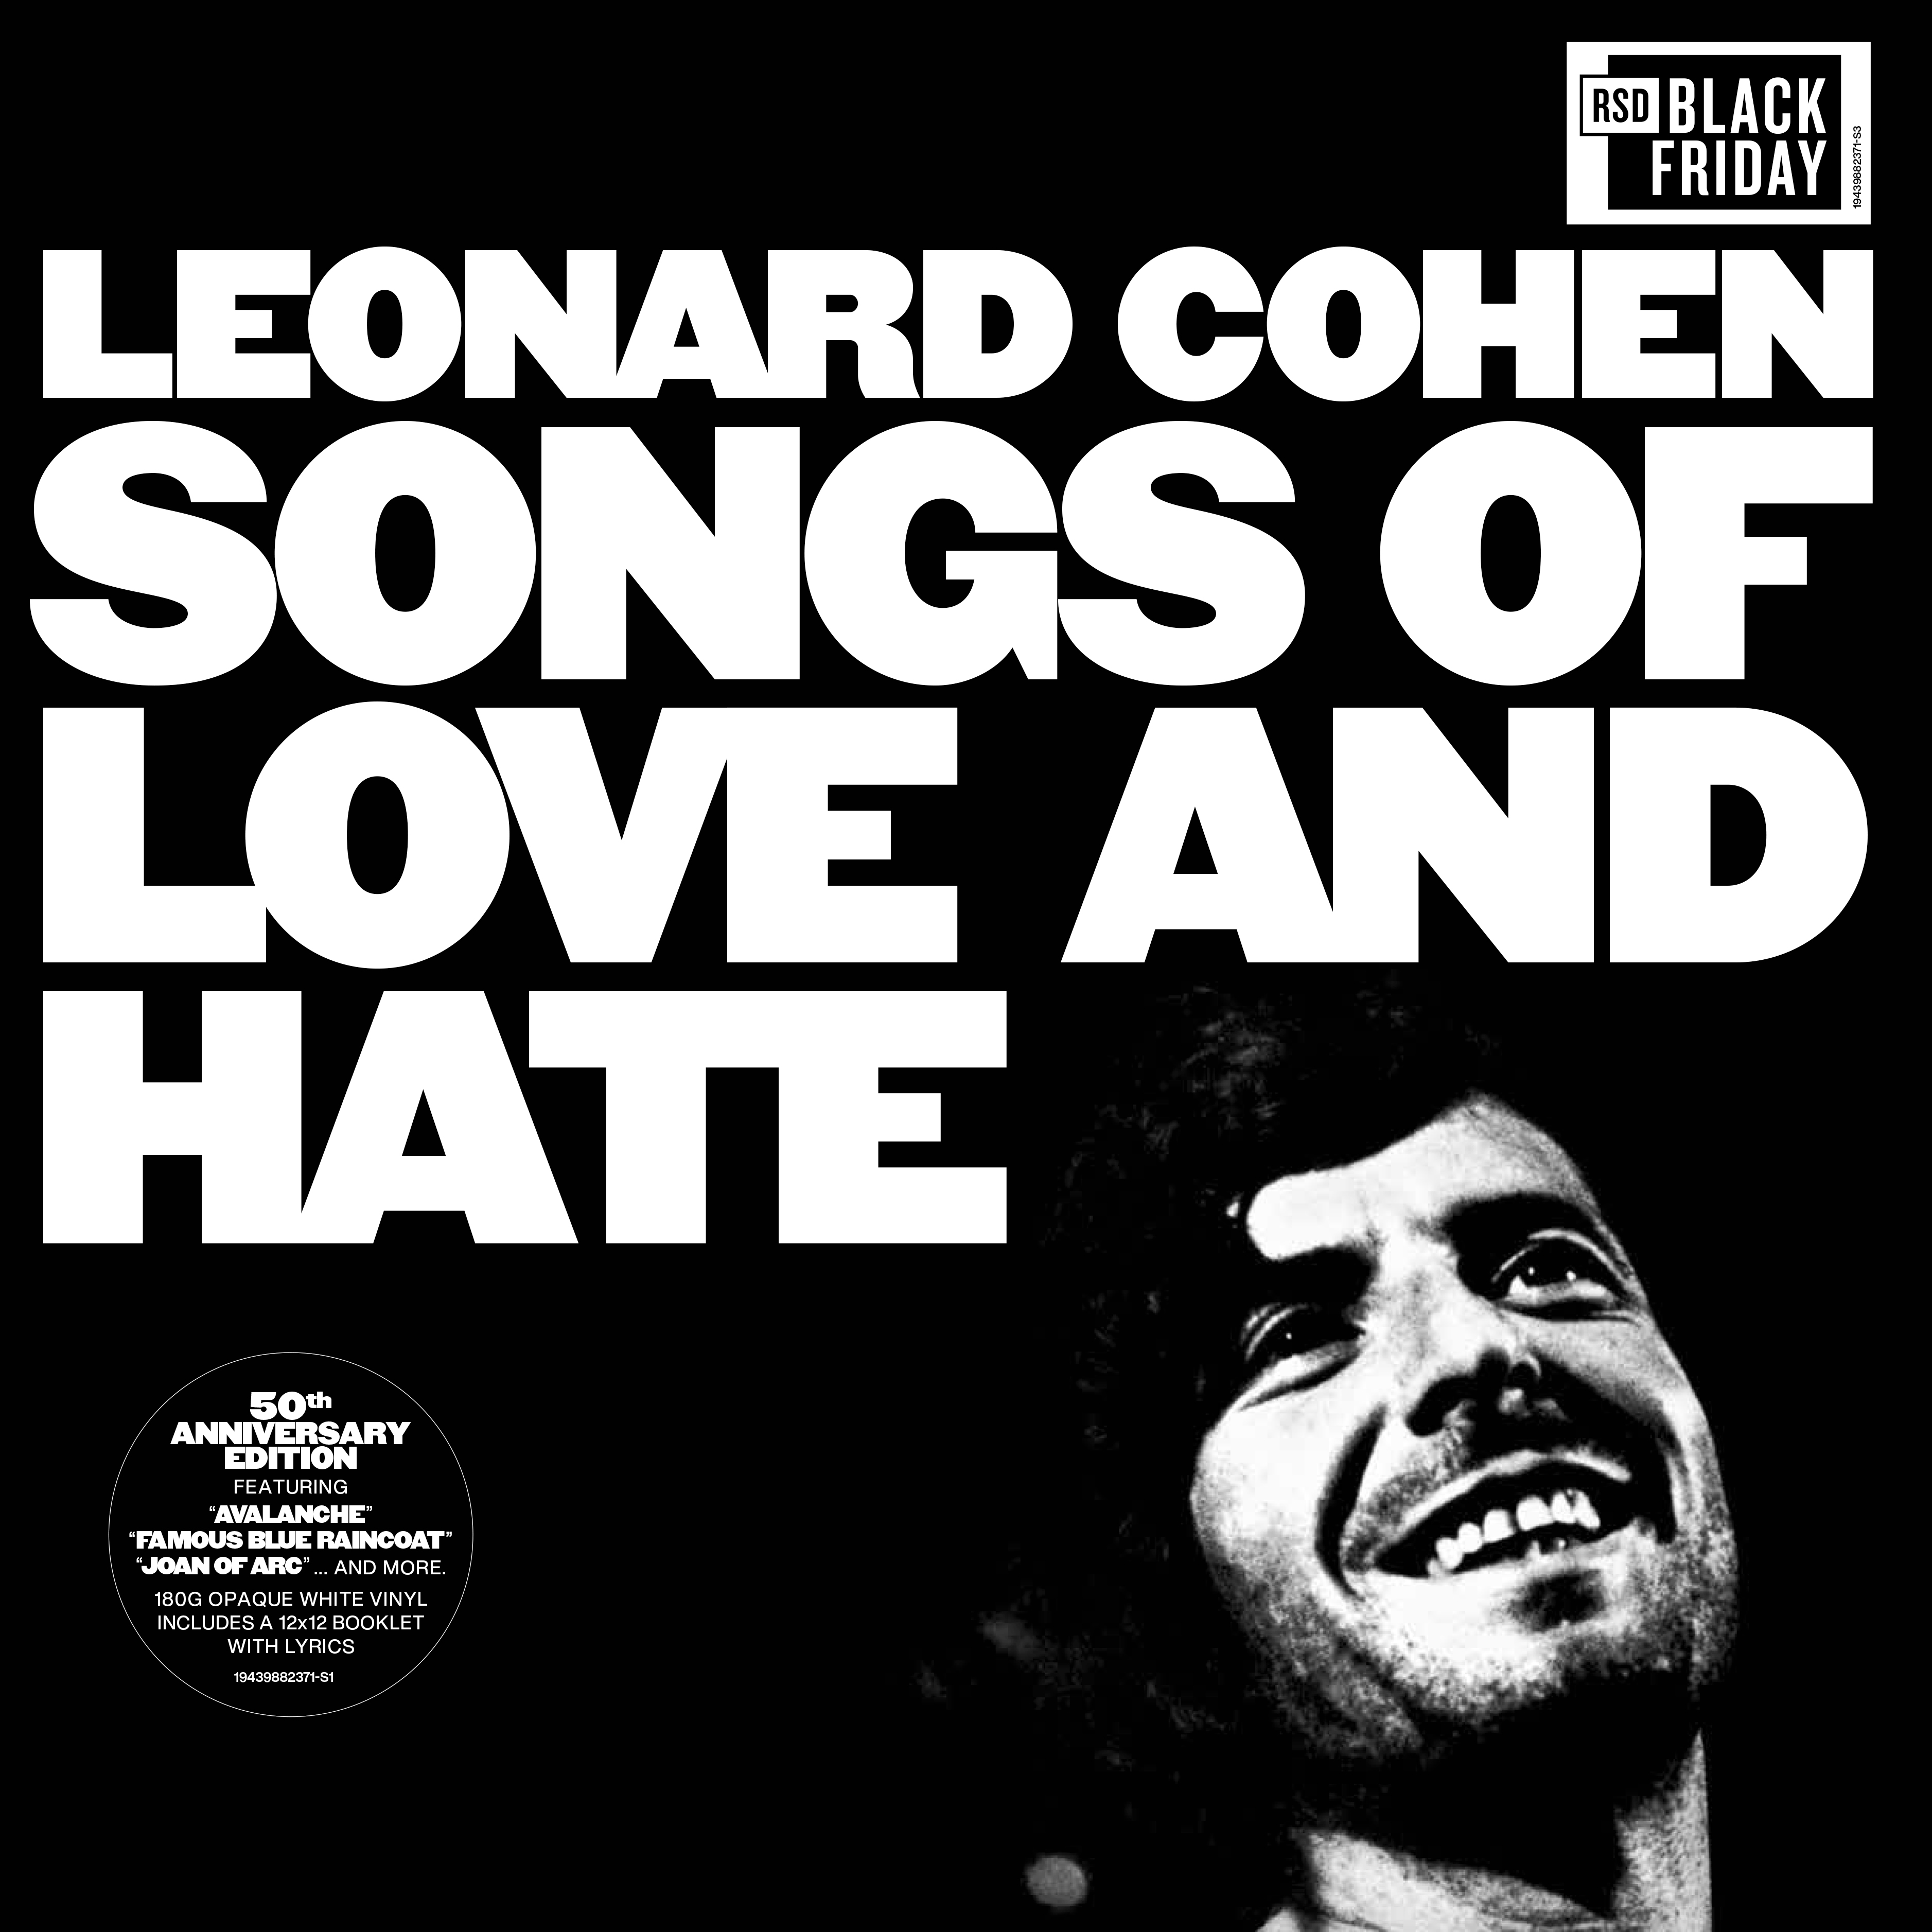 Leonard Cohen – Songs of Love and Hate. 50th Anniversary. Coloured White Vinyl (LP)